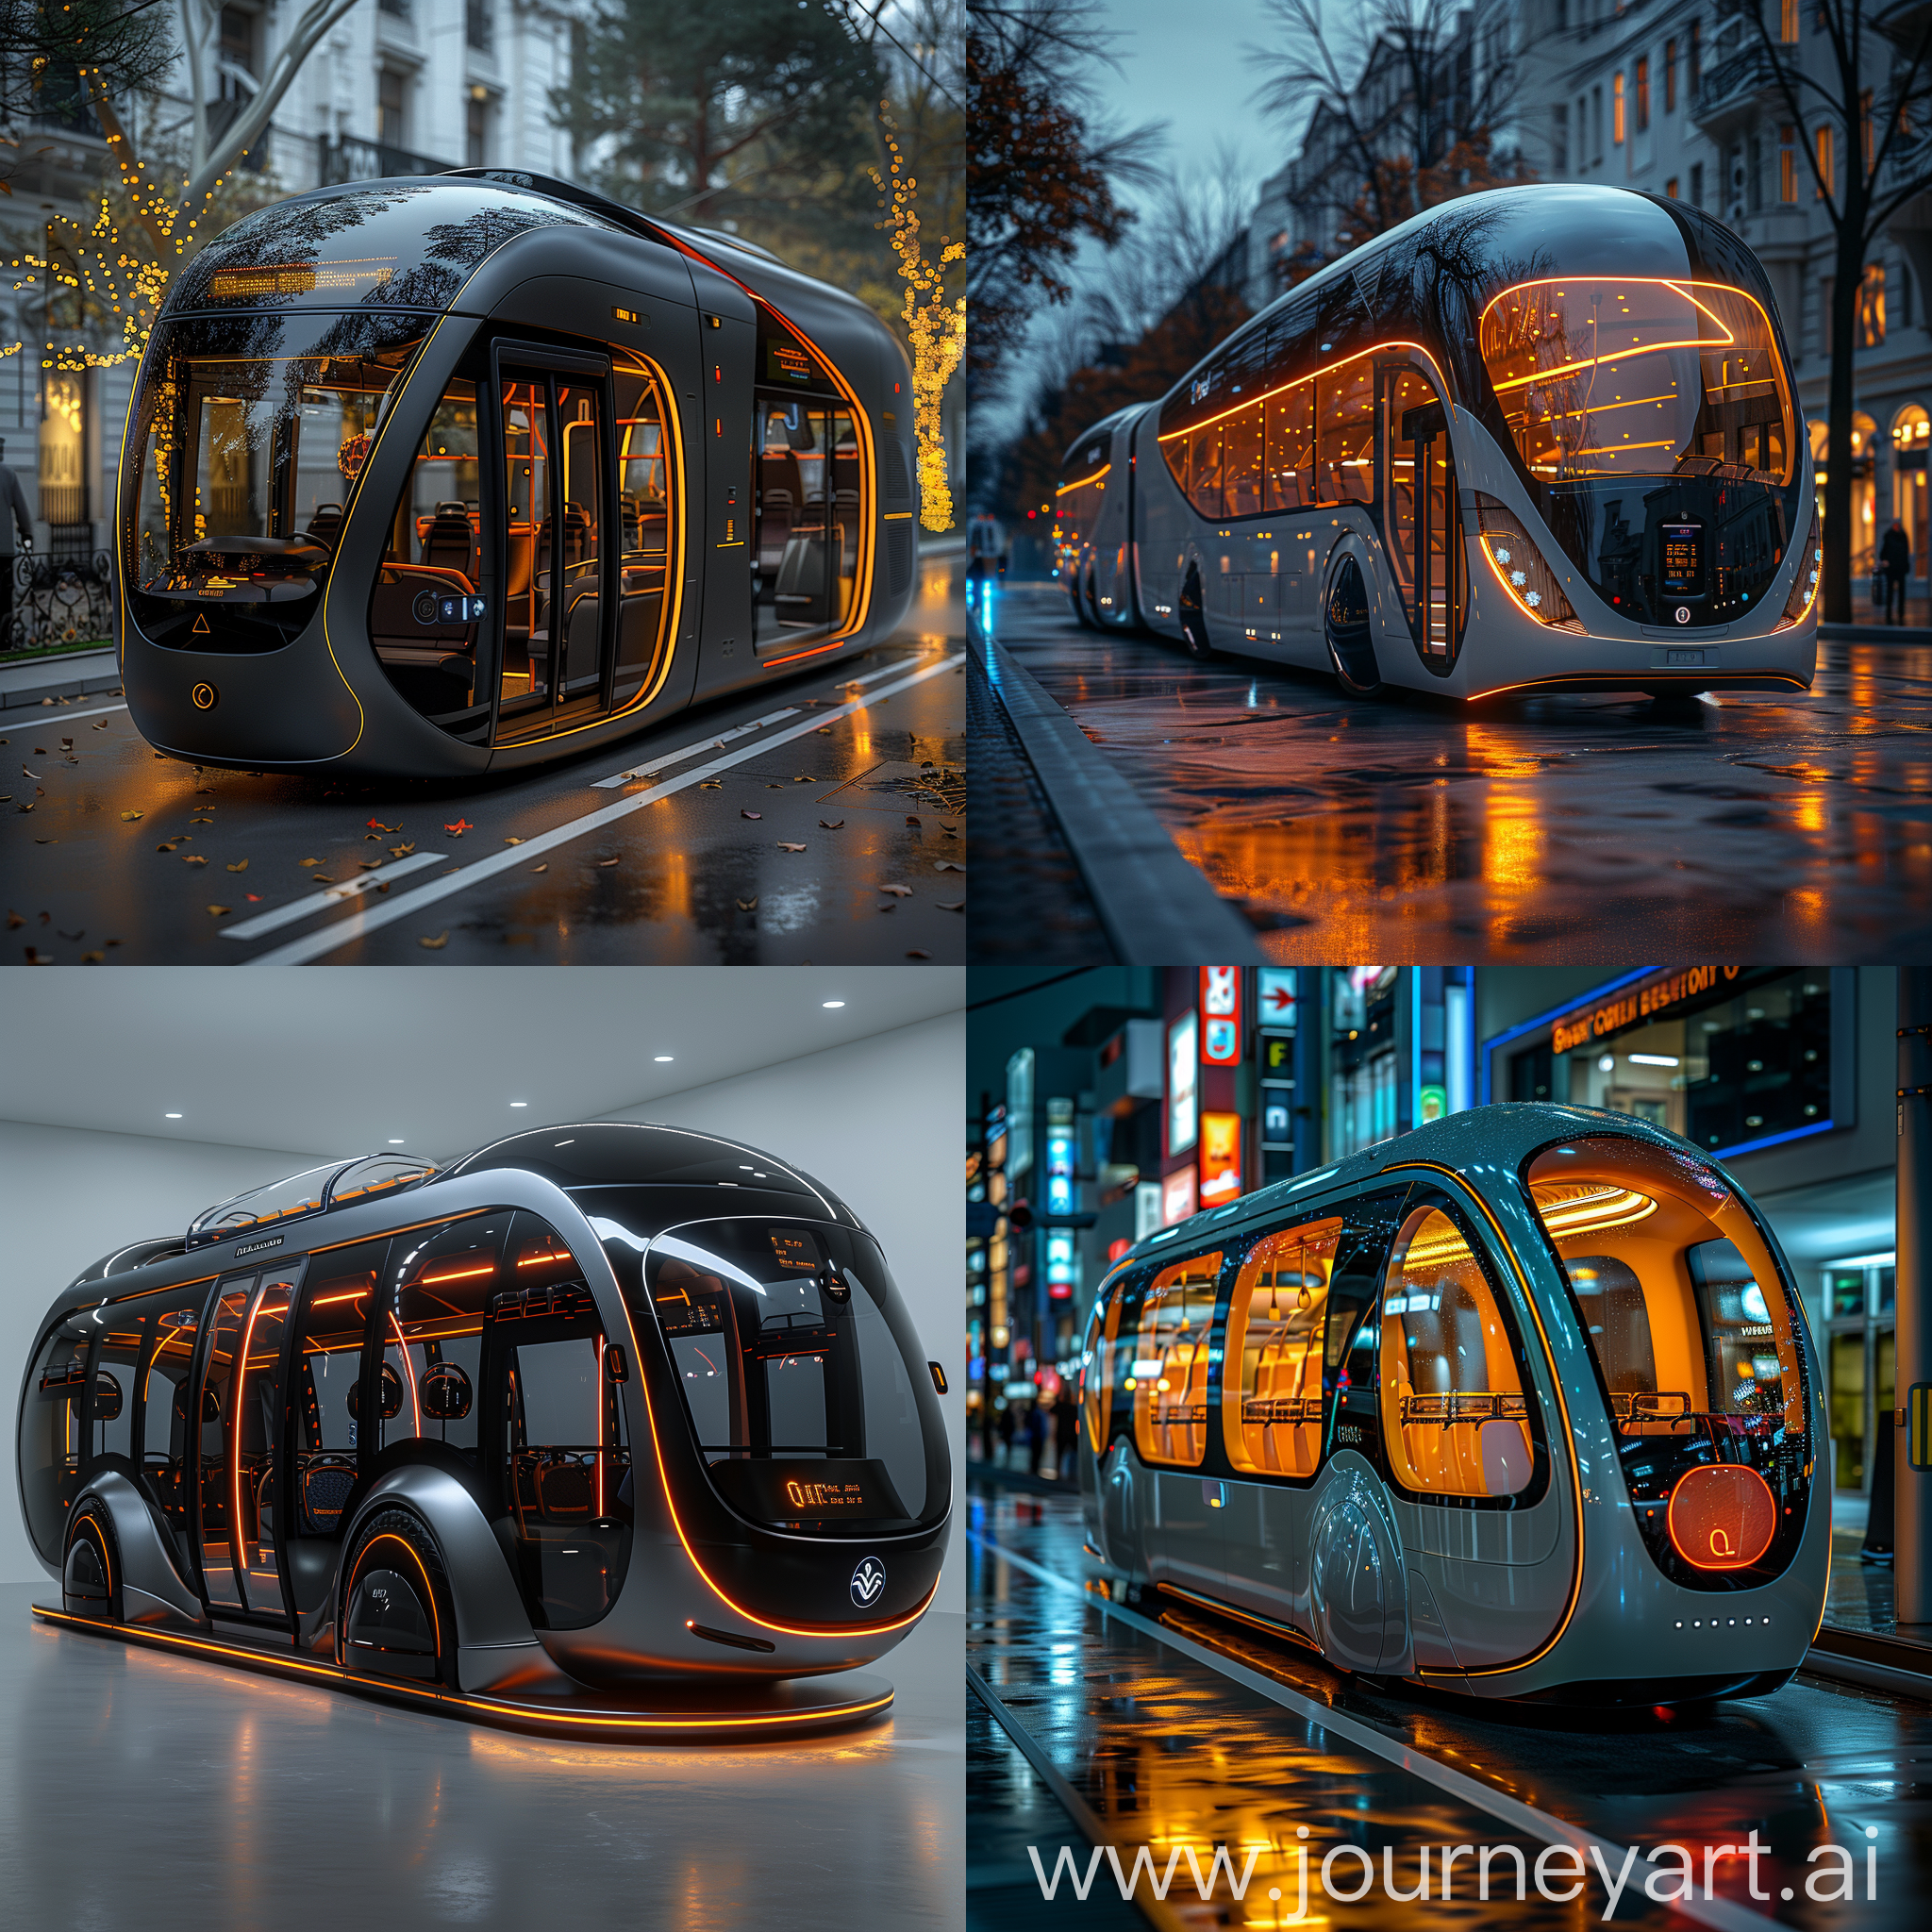 Futuristic bus, futuristic features, Autonomous Driving, Electric or Hydrogen Power, Dynamic Routing, Interactive Interiors, Smart Ticketing, Climate-Controlled Comfort, Biometric Security, Adaptive Seating, Self-Service Kiosks, Augmented Reality Navigation, octane render --stylize 1000